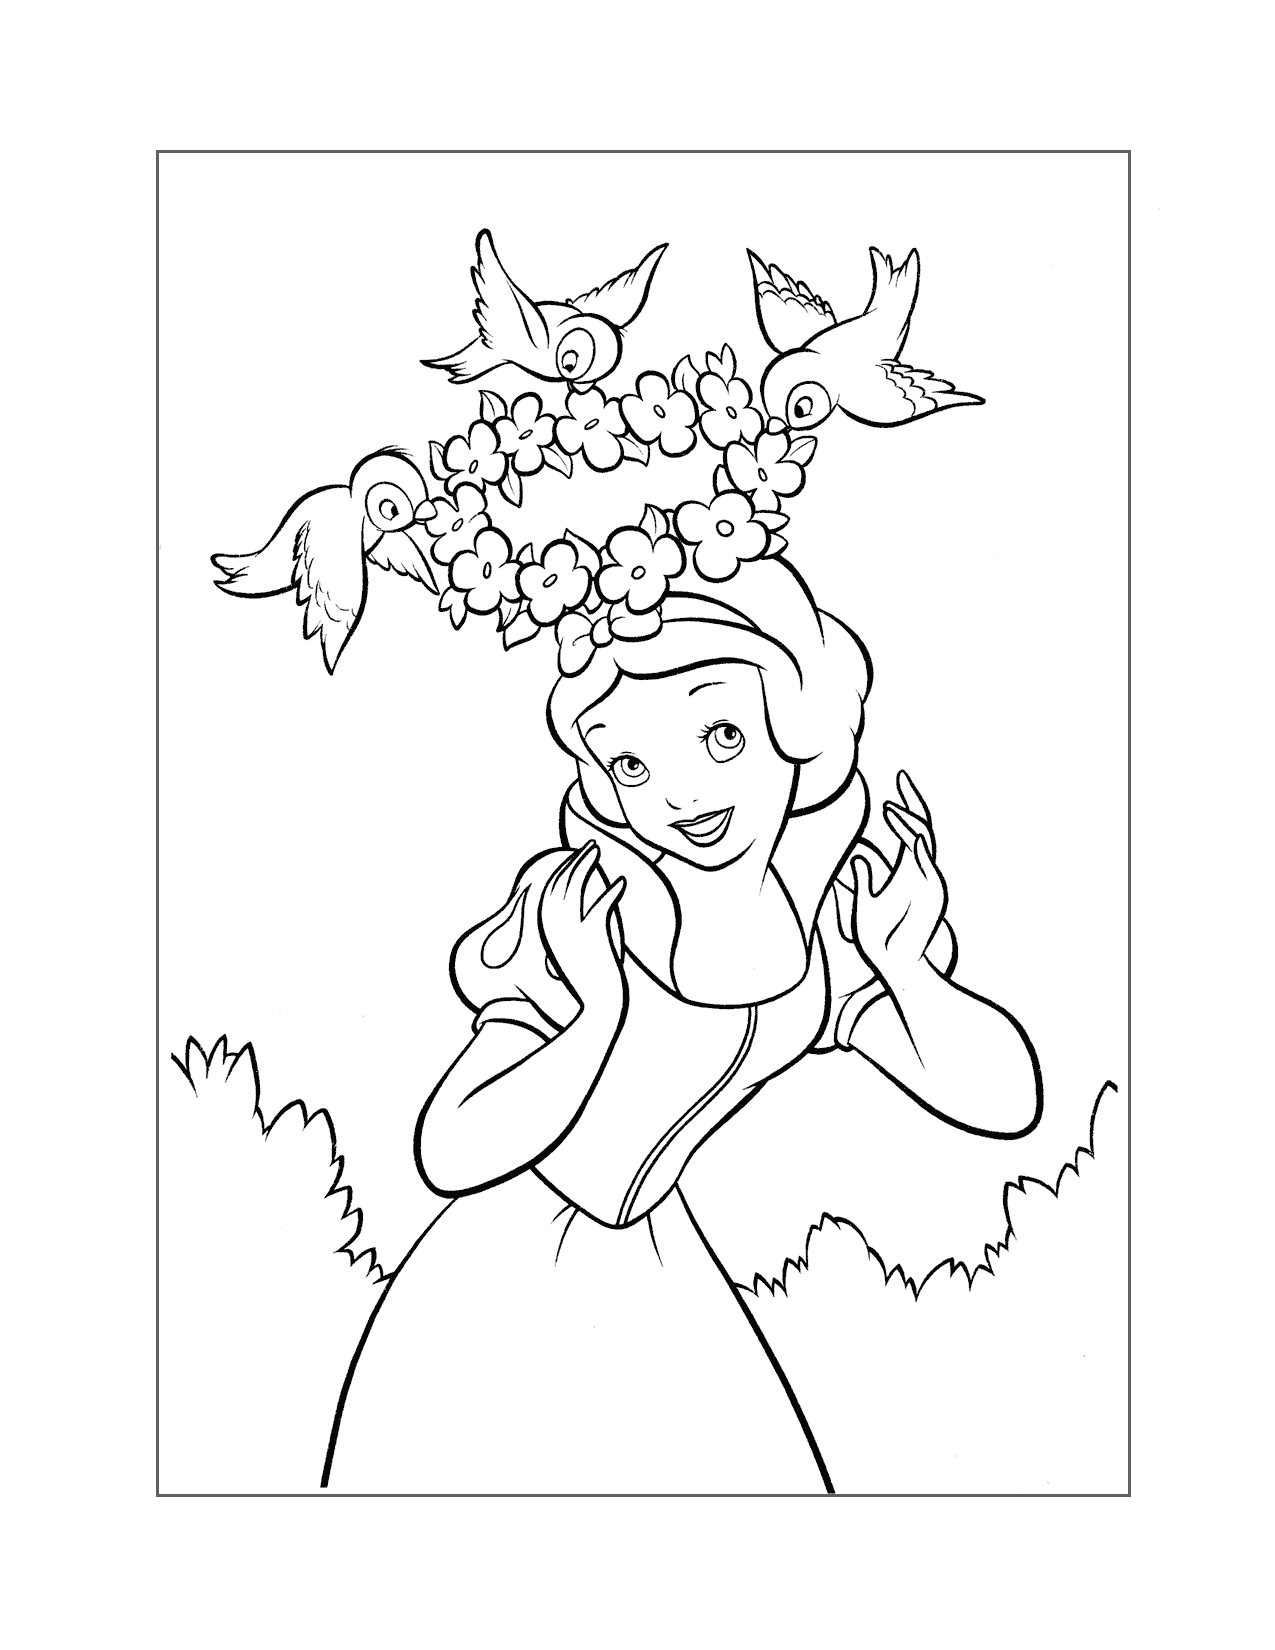 Birds Put Flowers In Snow Whites Hair Coloring Page